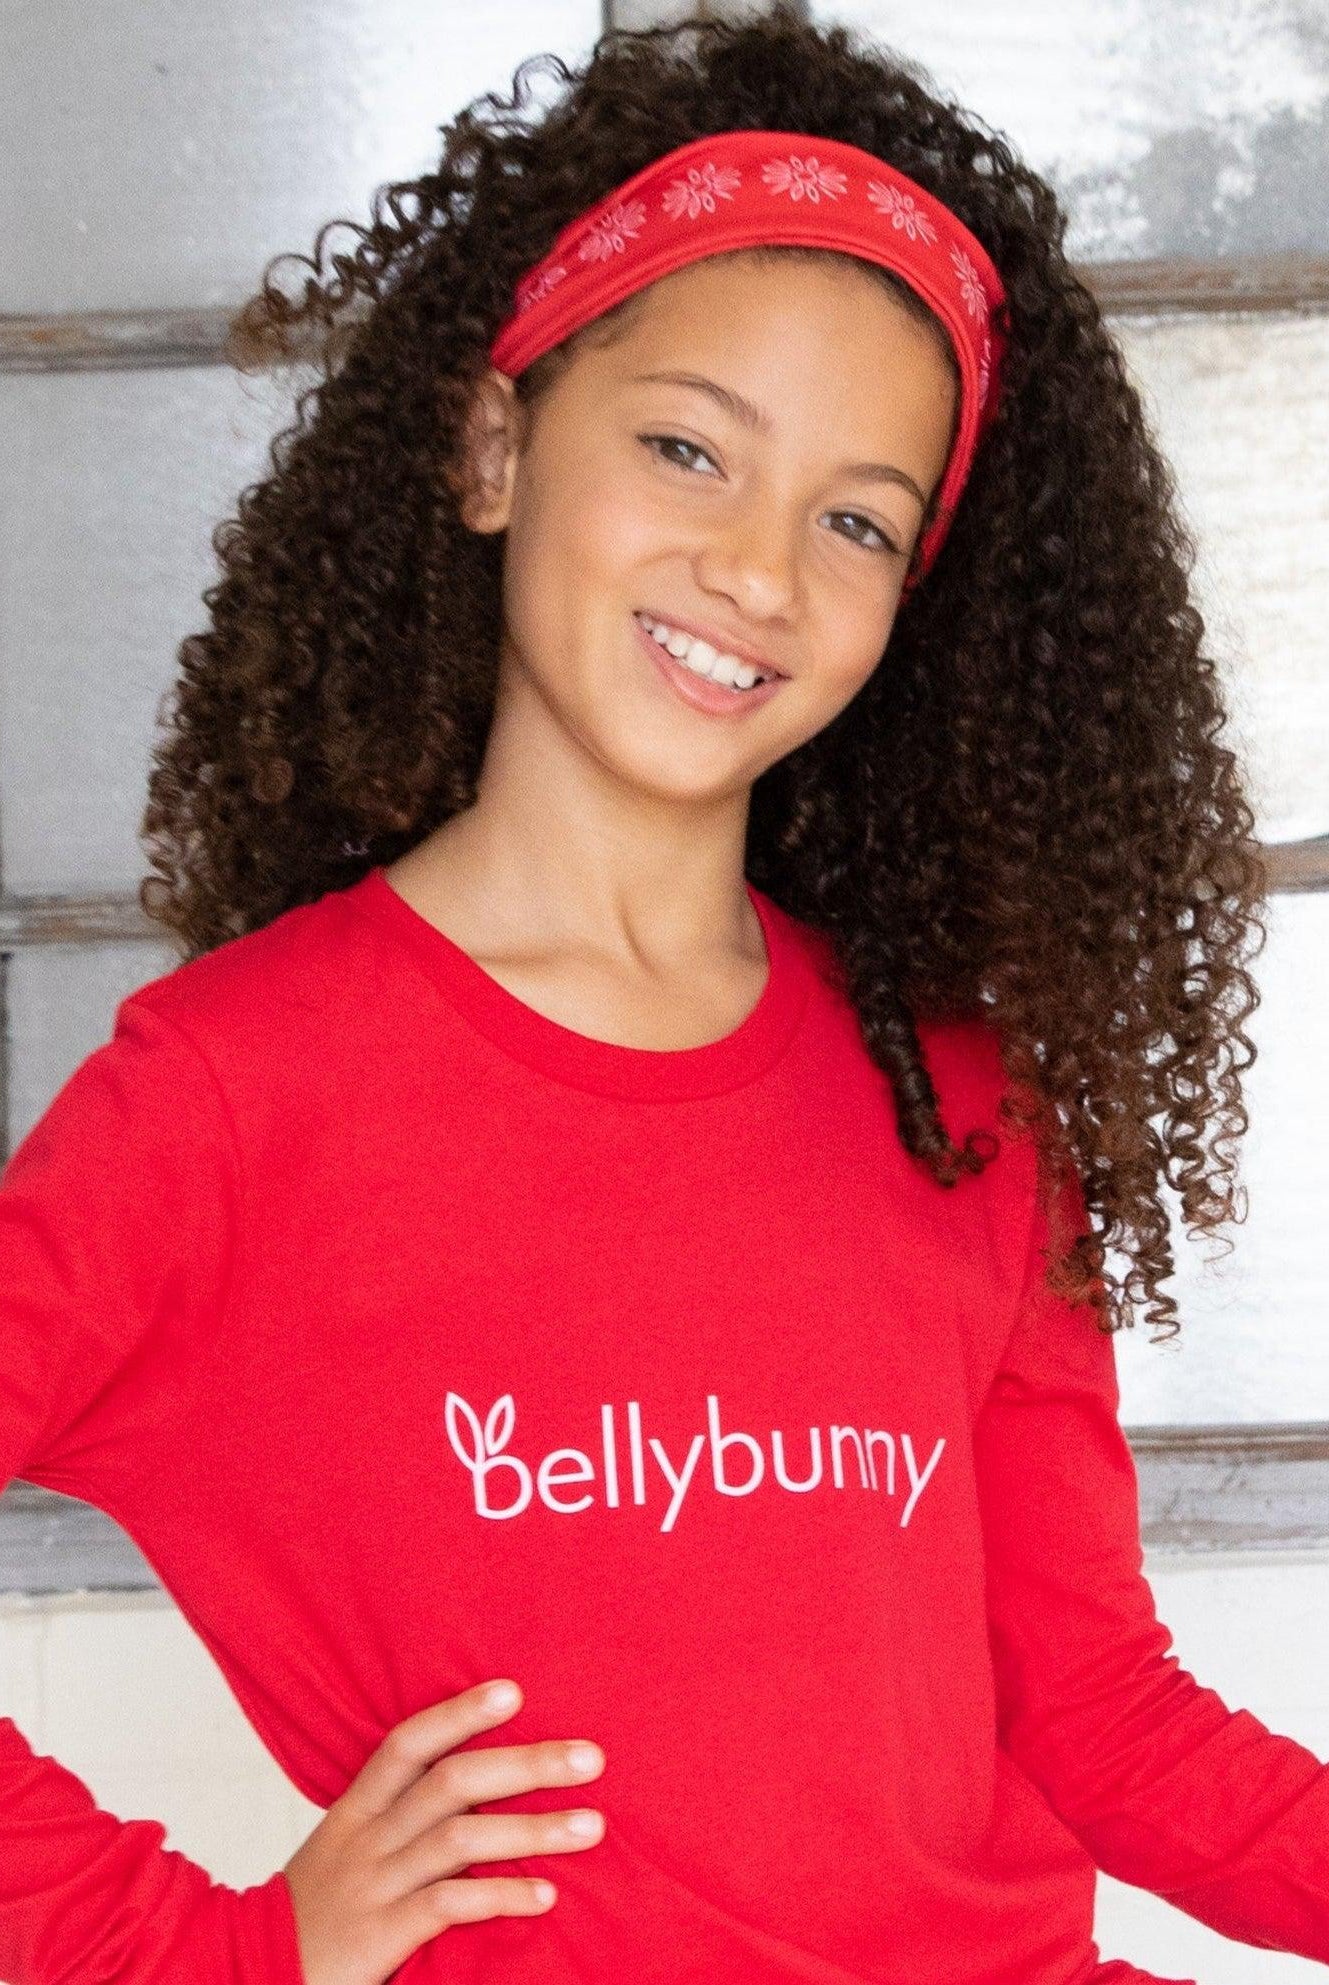 Bellybunny-Youth Long Sleeve T-Shirt